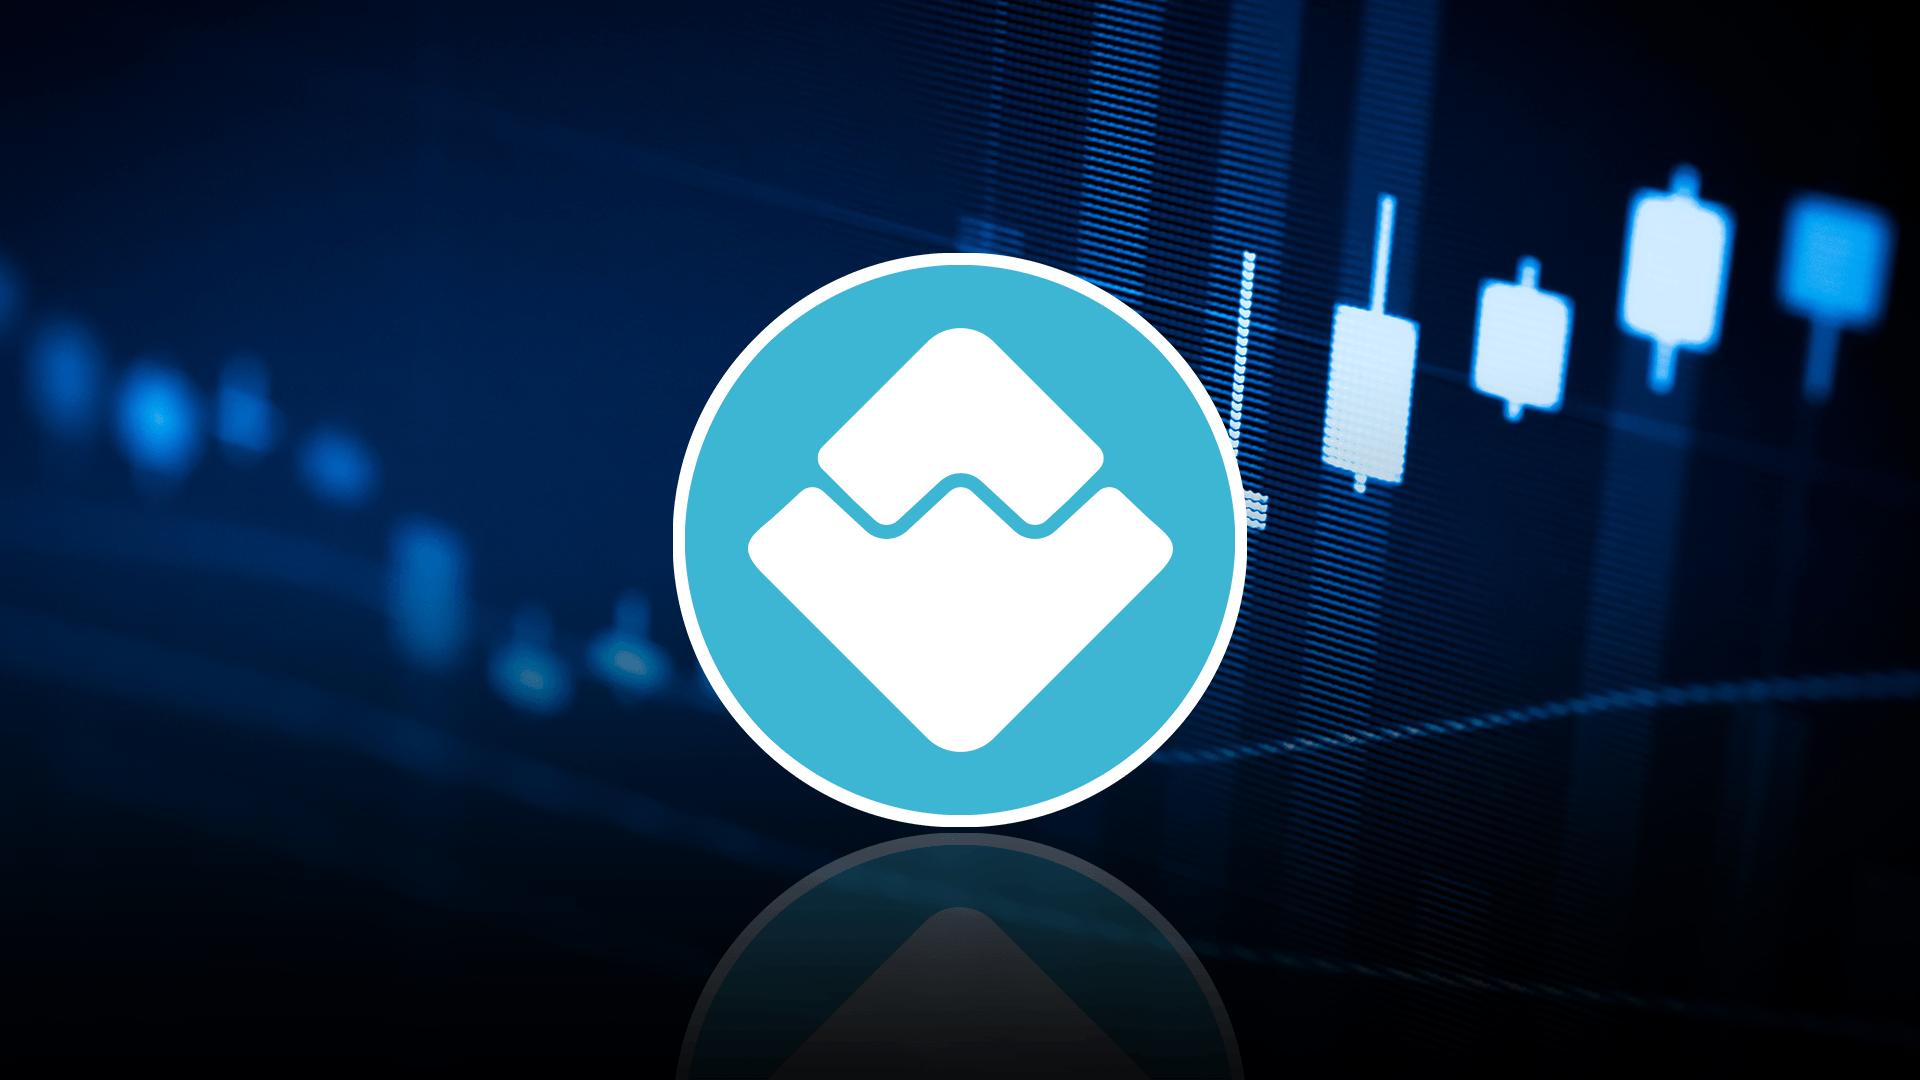 WAVES Technical Analysis: Uptrend Skyrockets Above $20 Mark